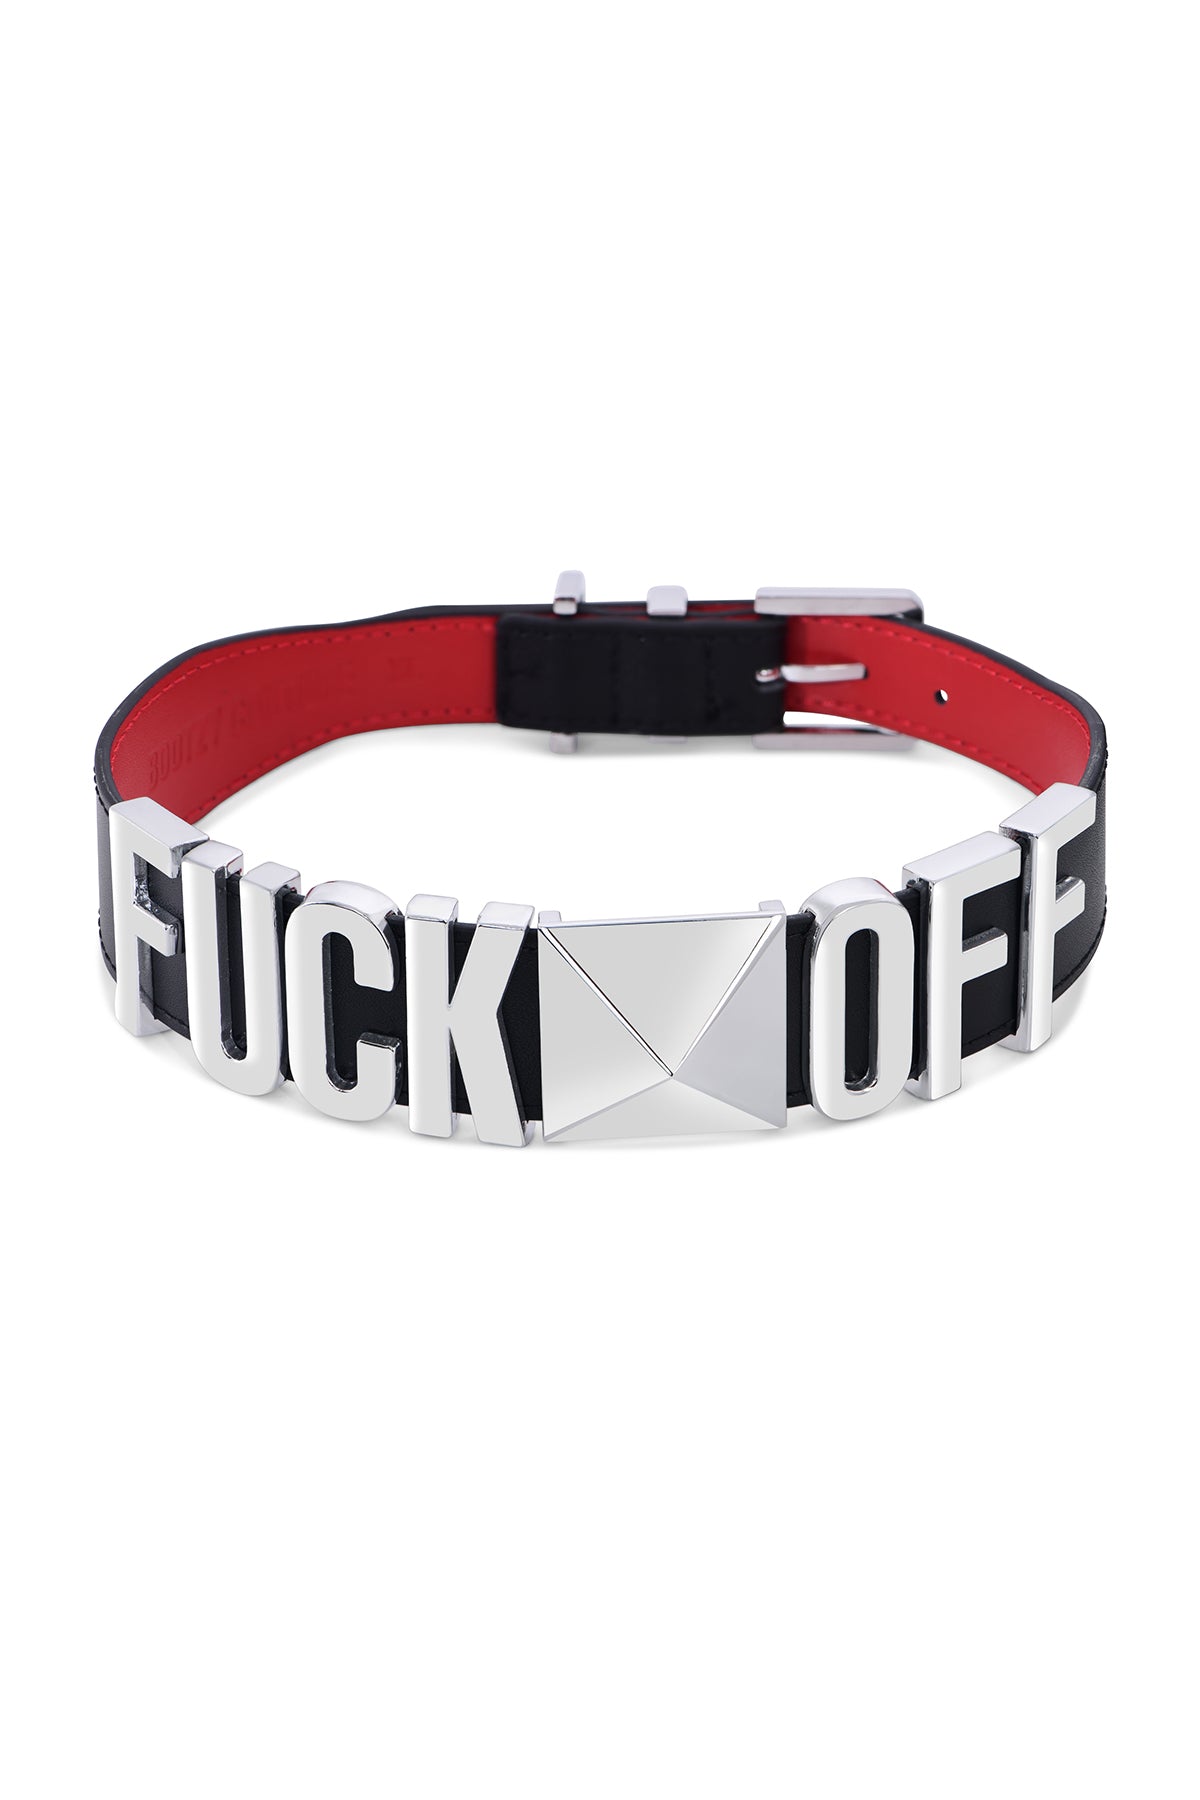 BOOTZY COUTURE | FUCK OFF 30MM COLLAR